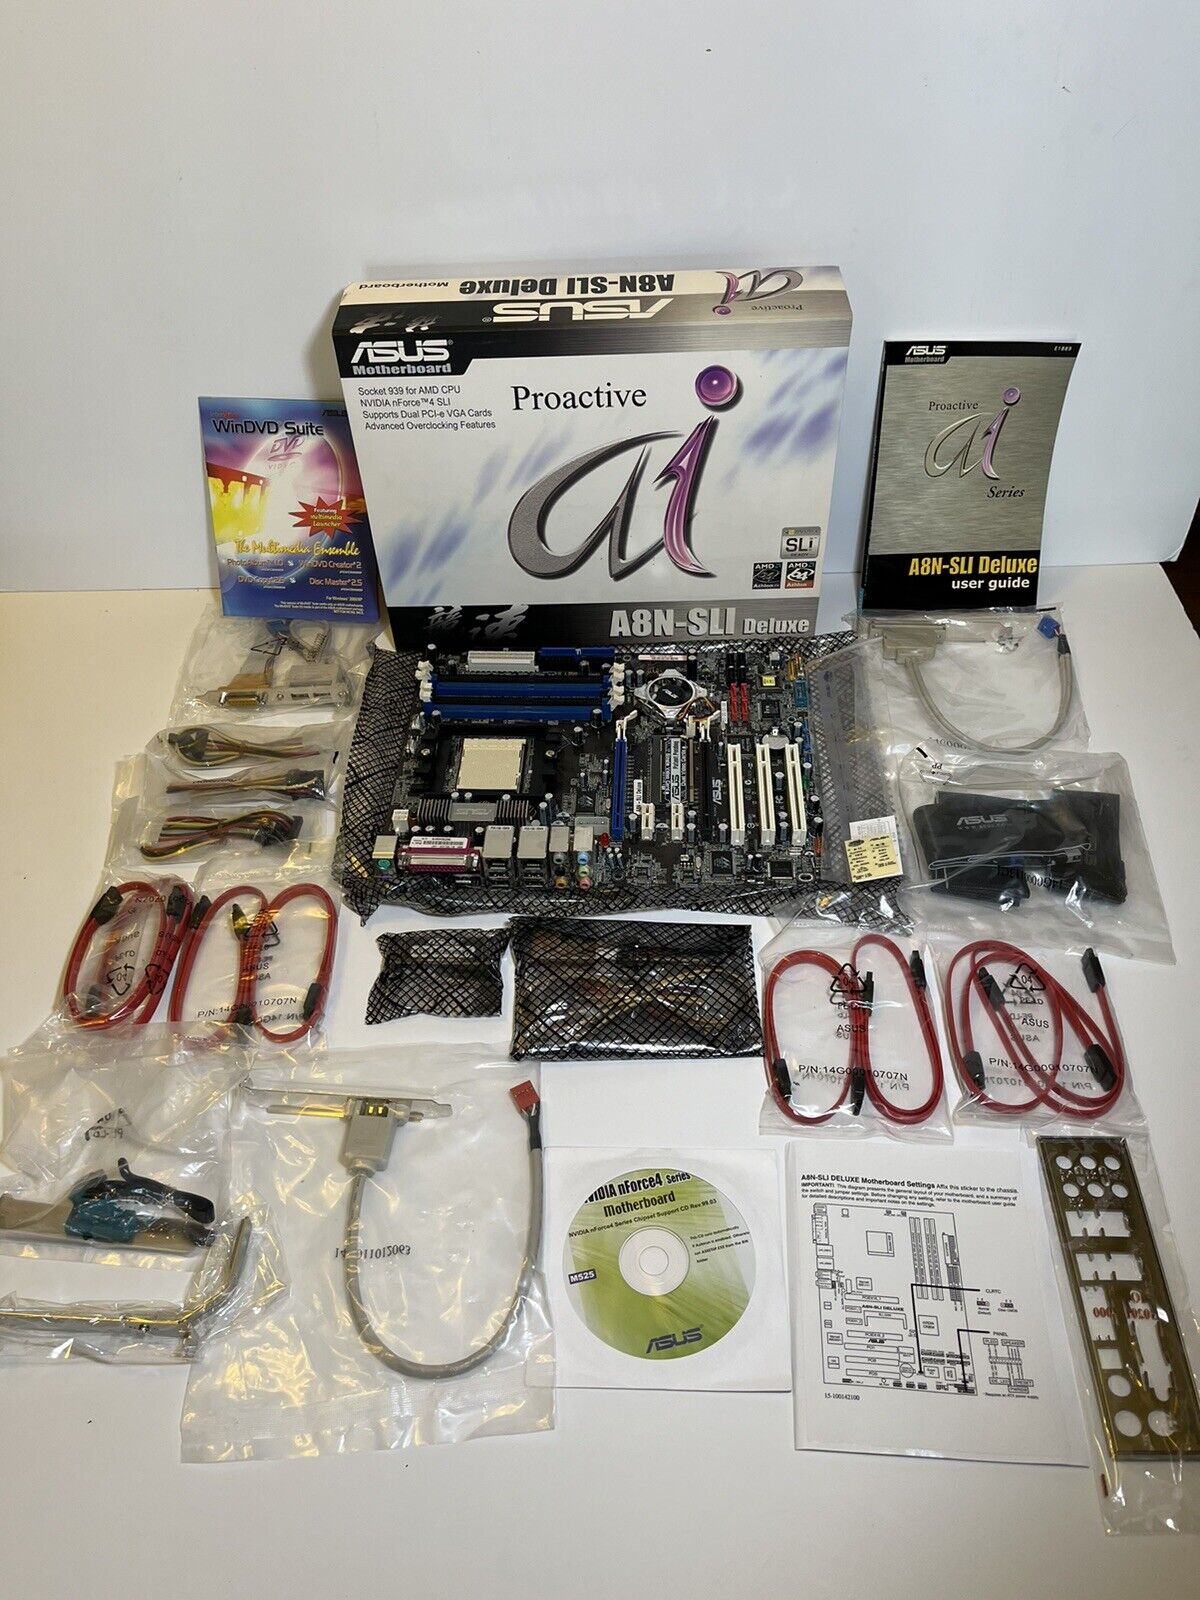 Asus A8N-SLI Deluxe Motherboard Socket 939 for AMD CPU NVidia NForce 4 OPEN BOX